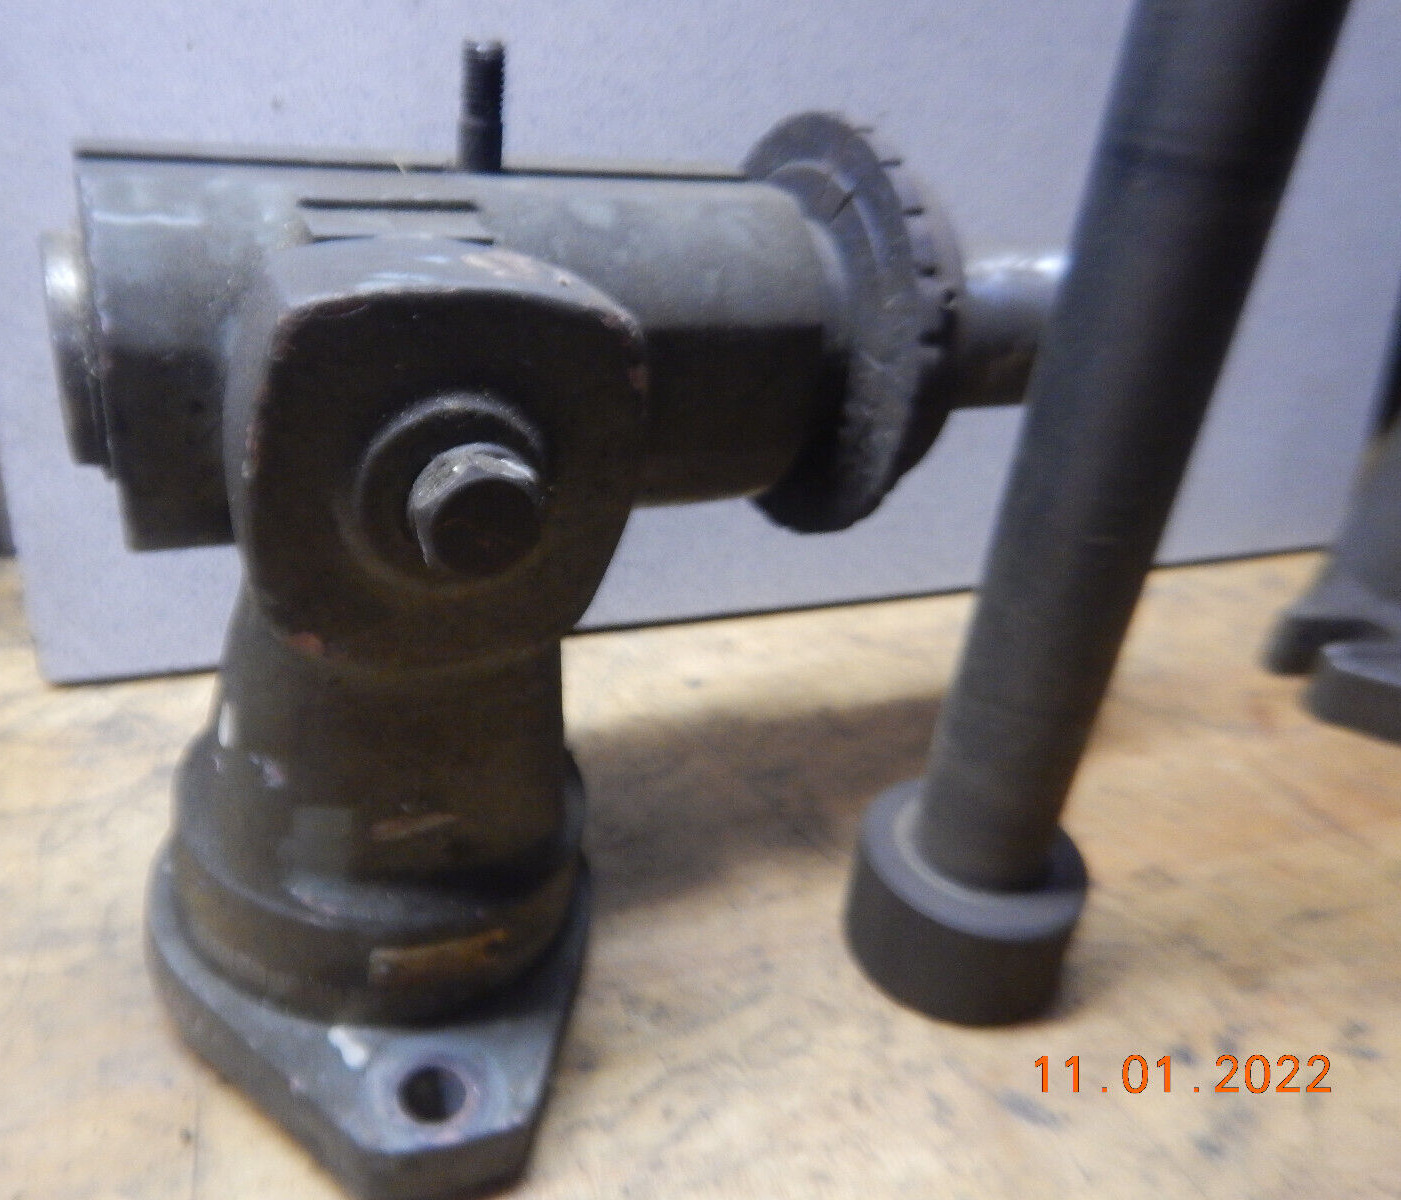 Older 5c Collet Fixture With Swivel Base And Draw-bar Machinist Jig Fixture